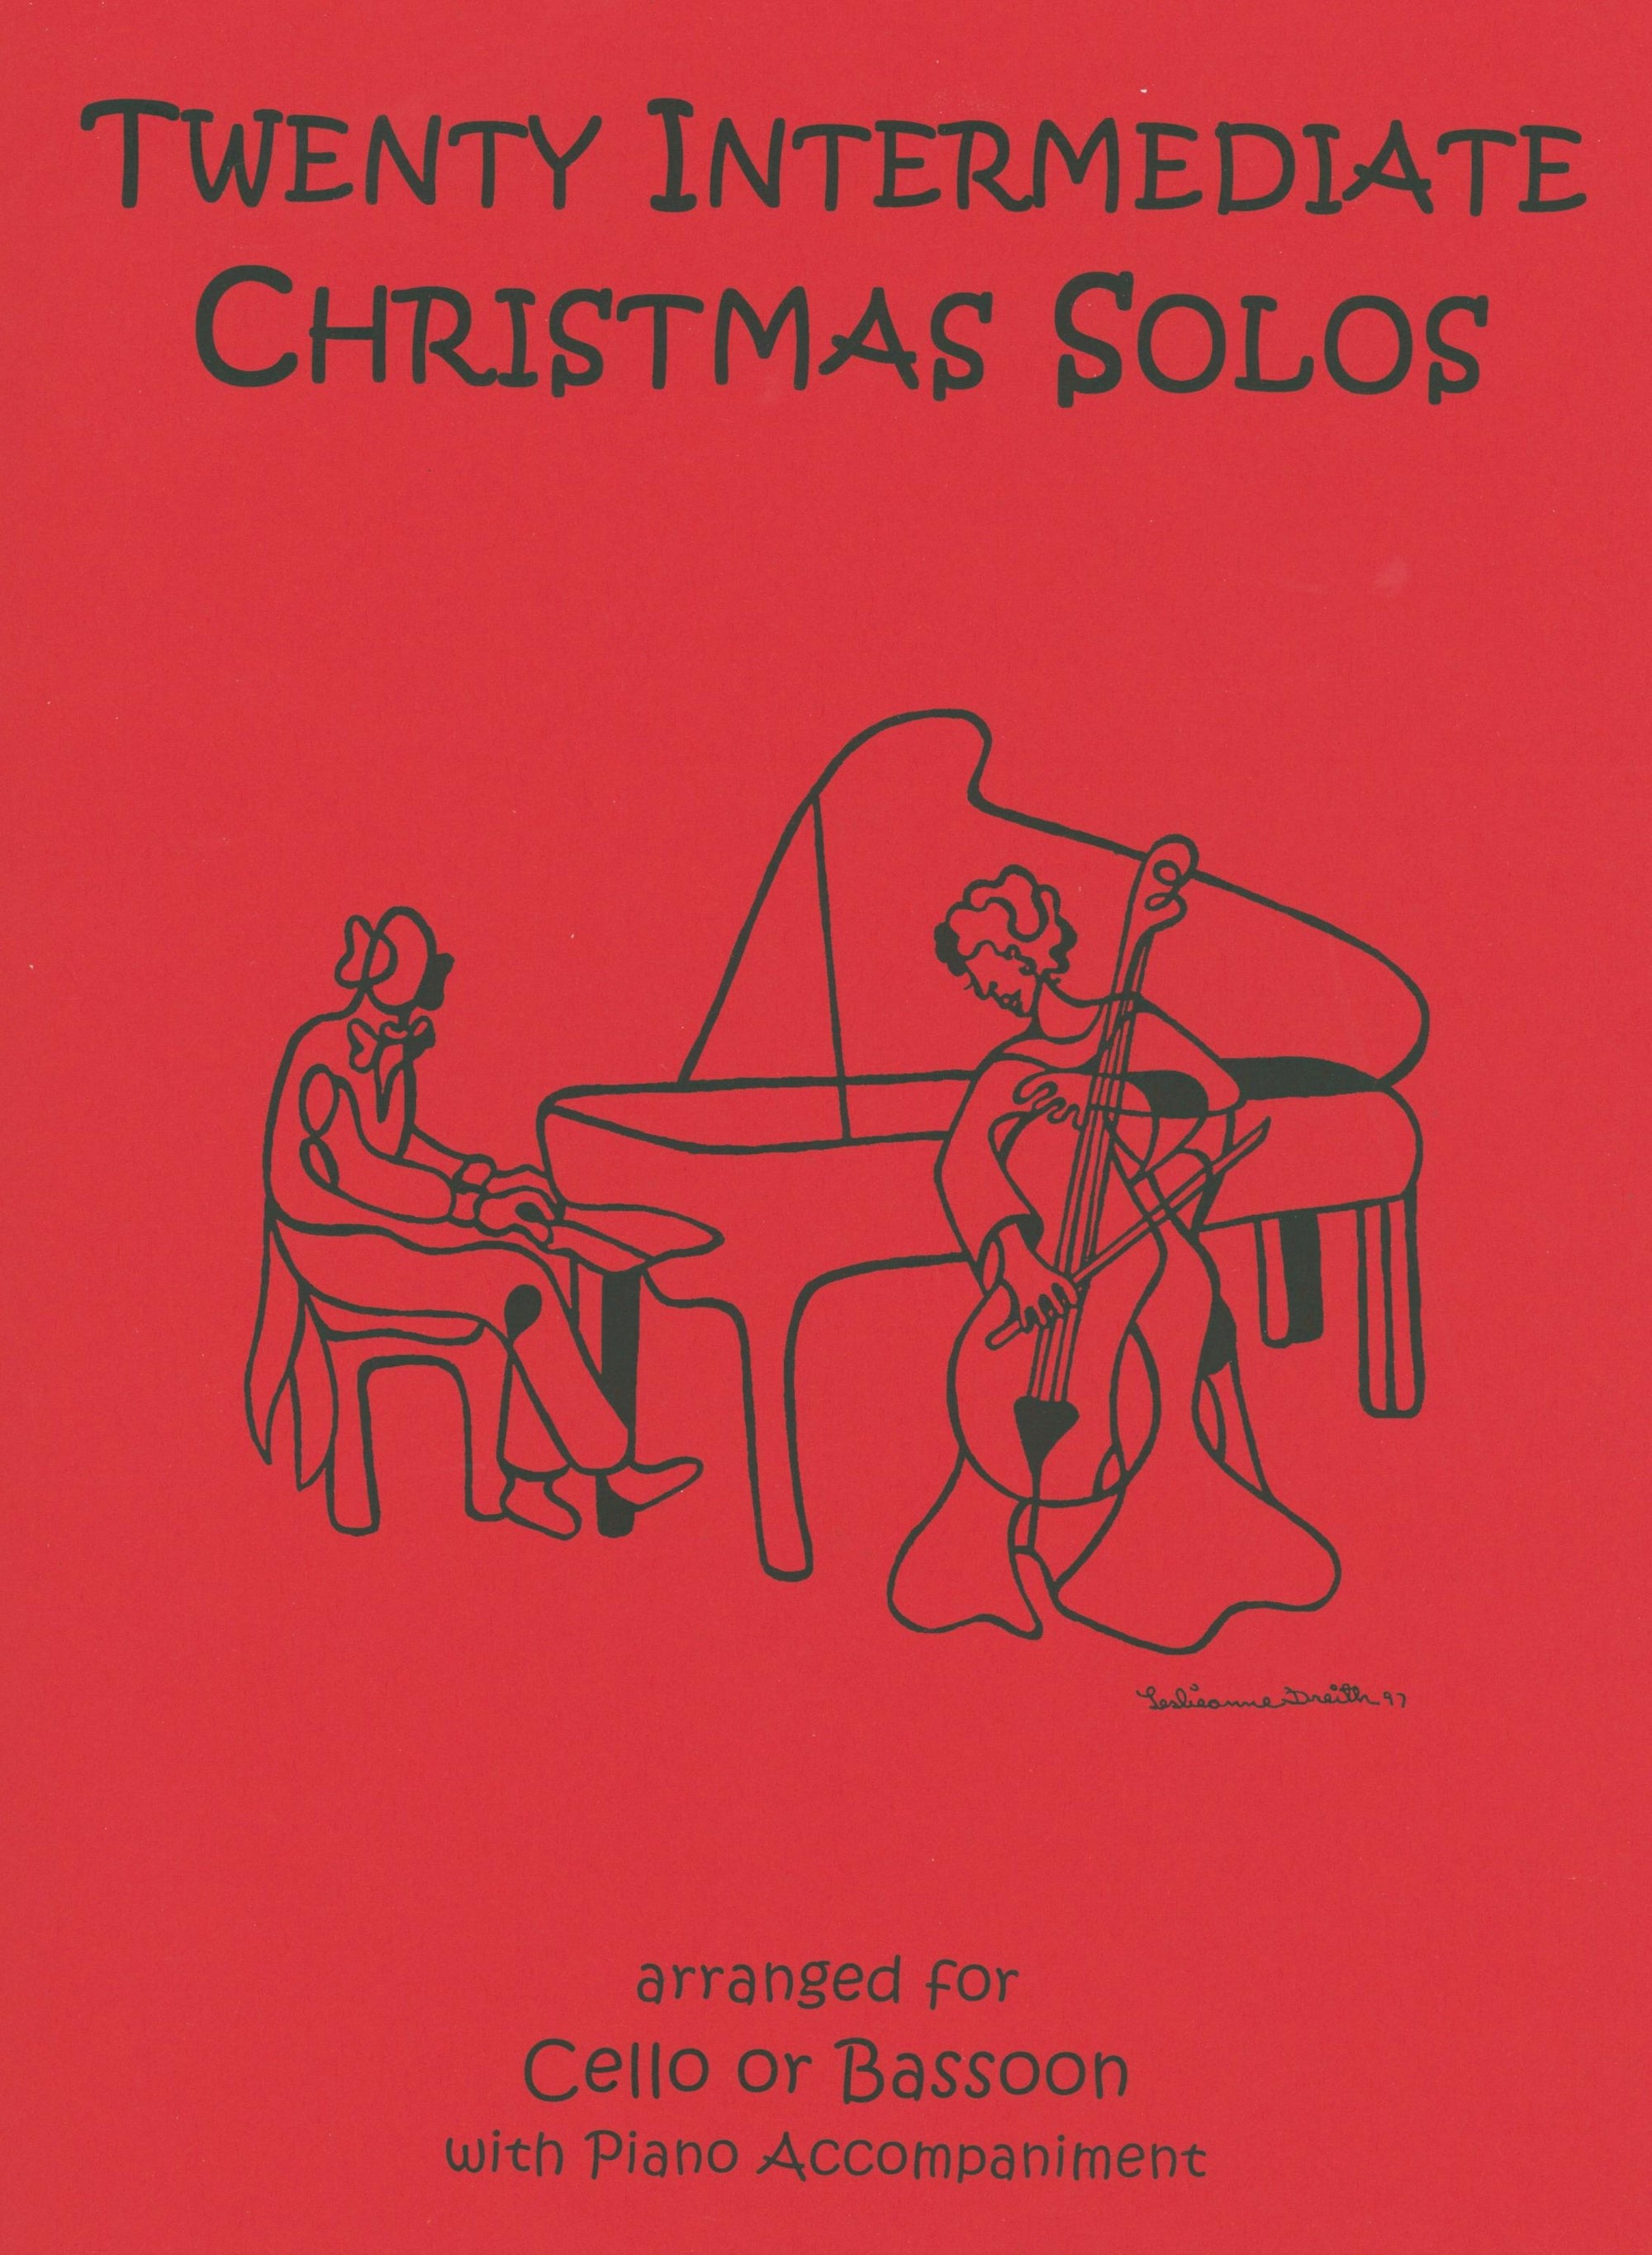 20 Intermediate Christmas Solos (arr. for cello or bassoon & piano)